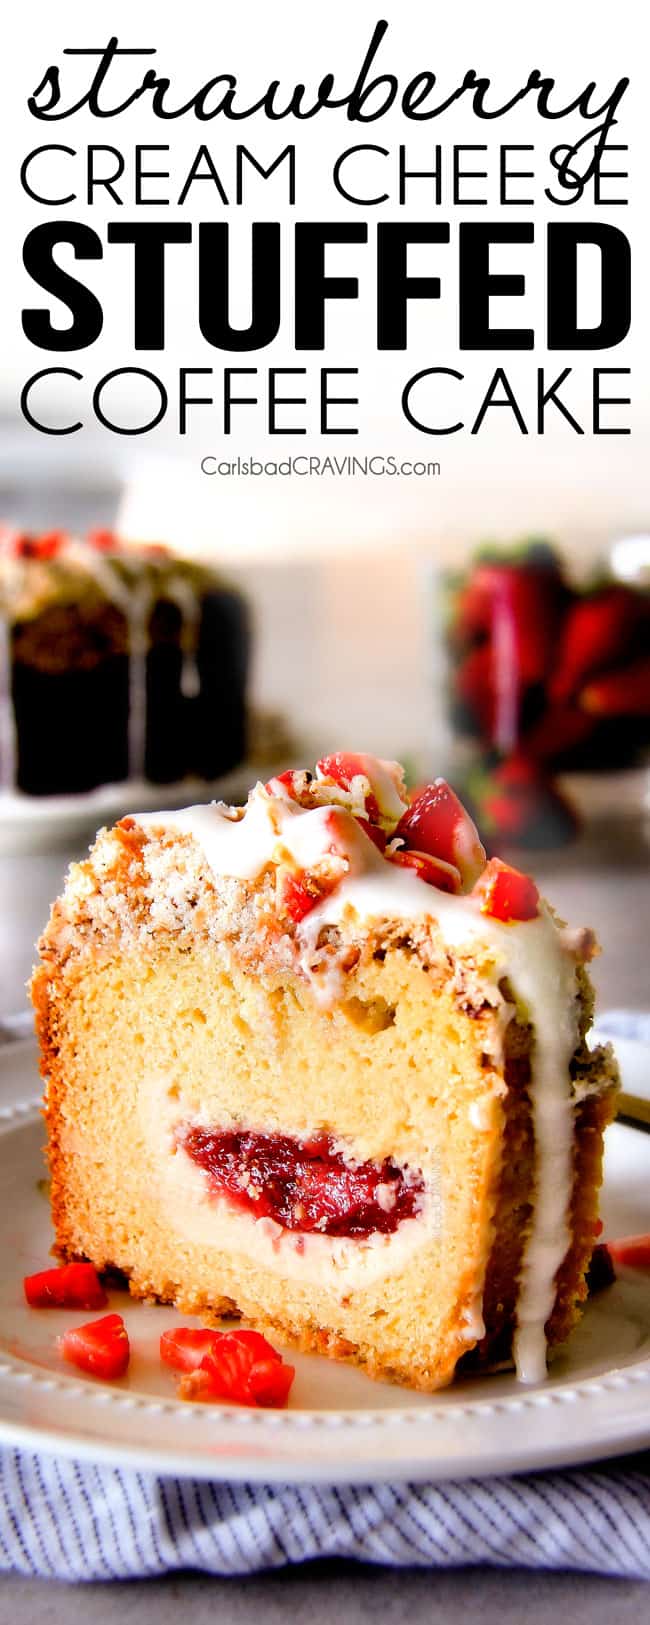 Strawberry Cream Cheese STUFFED Sour Cream Coffee Cake - this is the best strawberry coffee cake ever! the INCREDIBLY creamy cheesecake-like cream cheese filling and strawberries all topped with Coconut Pecan Streusel and Lemon Drizzle is OUT OF THIS WORLD! I can't say enough good things about this coffee cake!